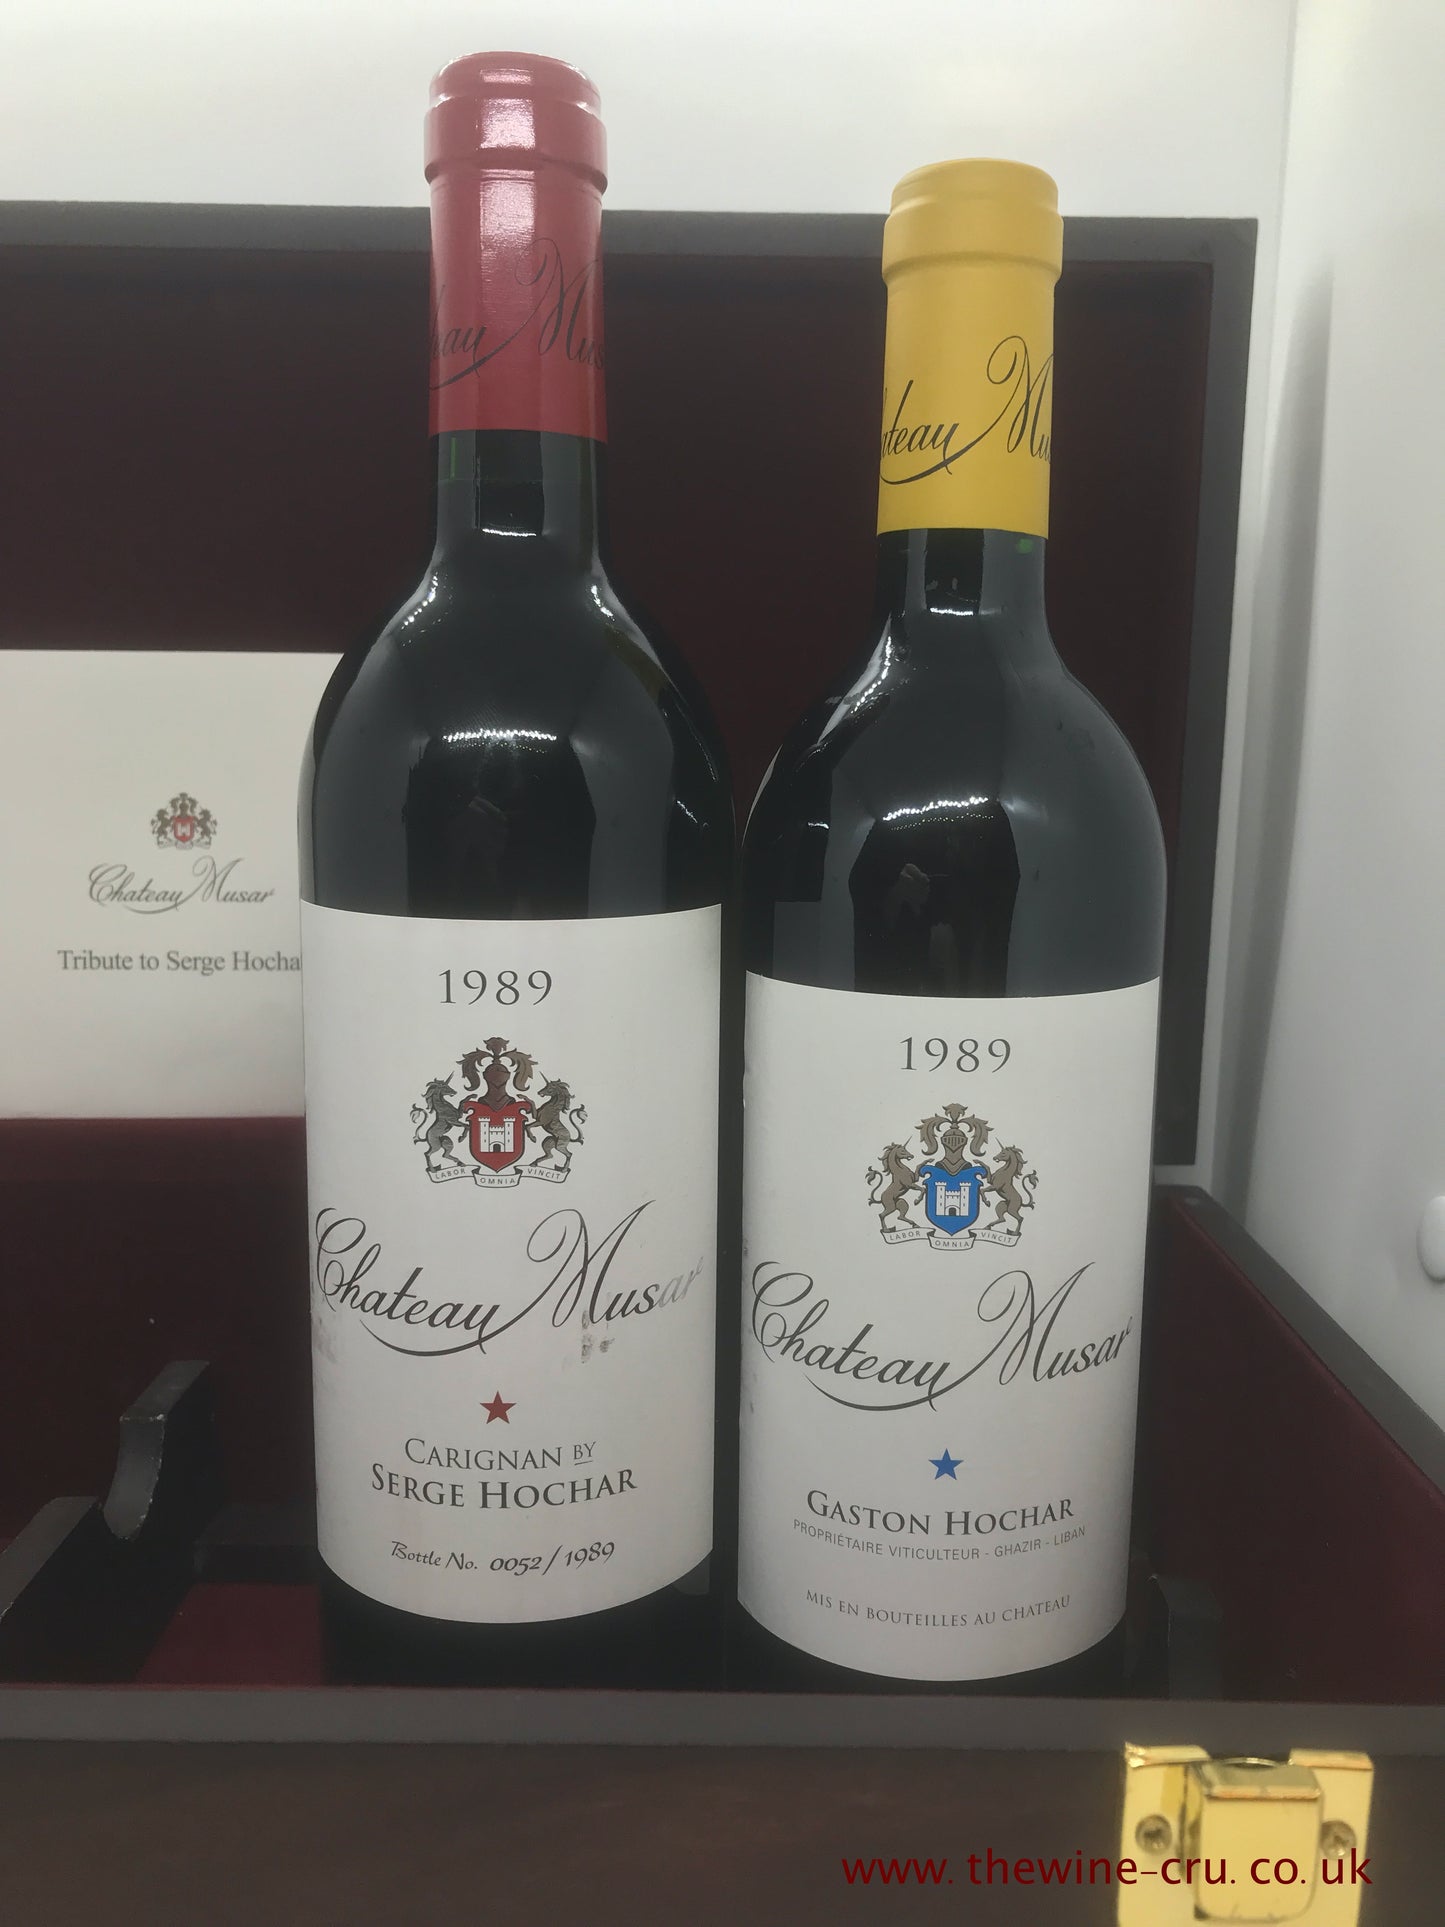 1989 vintage wine. A two bottle presentation case of Chateau Musar Red and White wine 1989. Immediate delivery. Free local delivery.